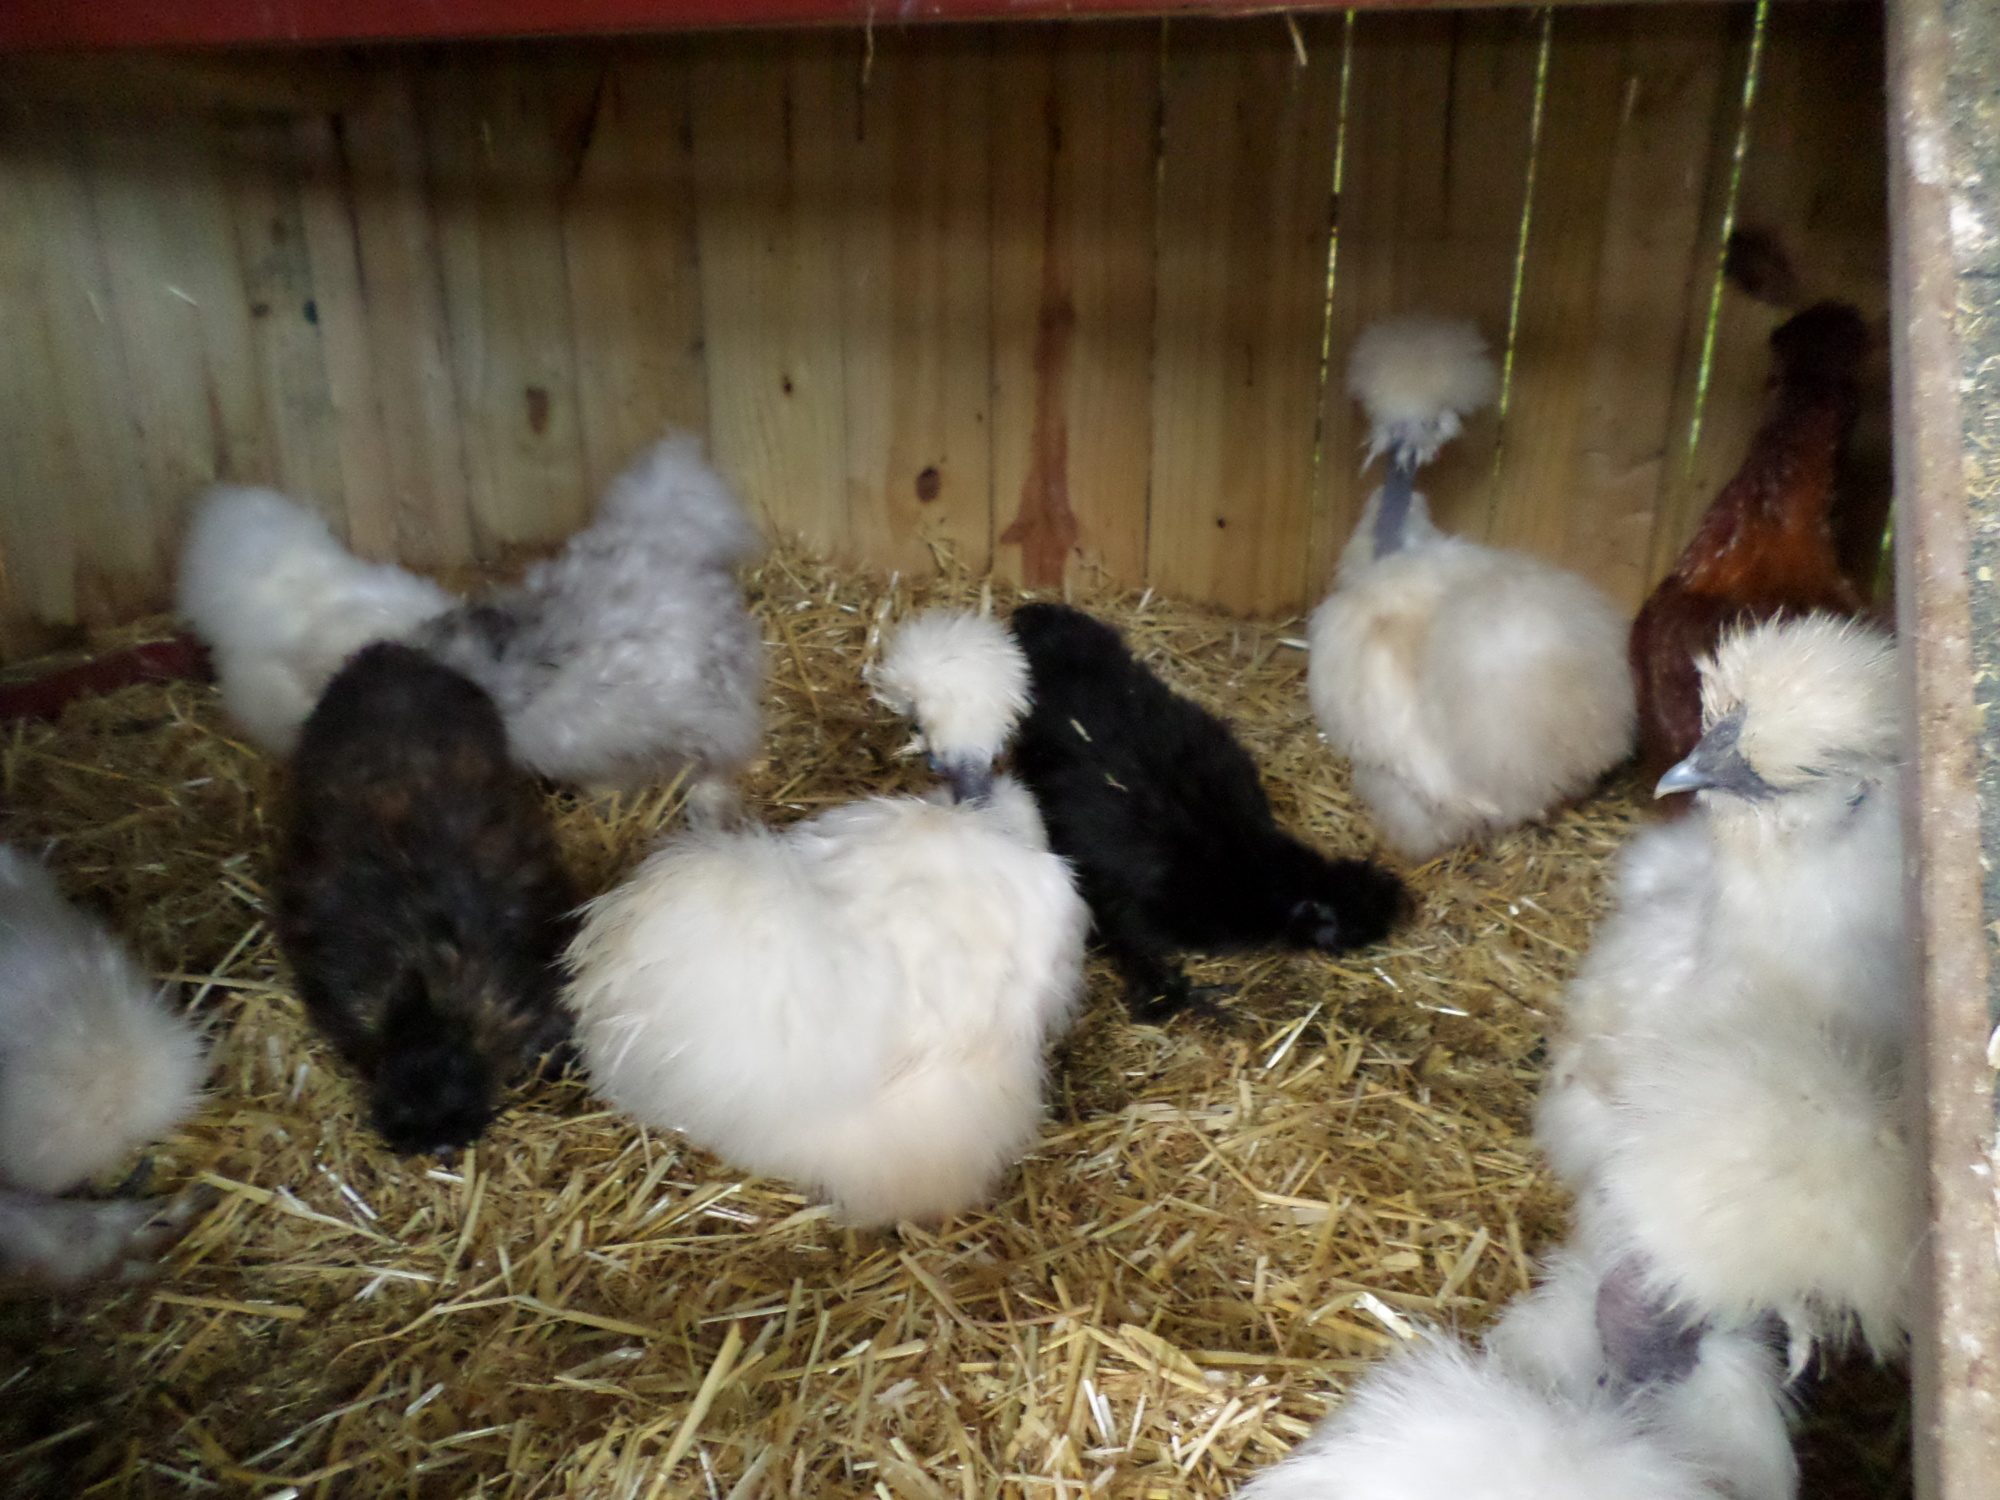 Some of my Silkies and Showgirls